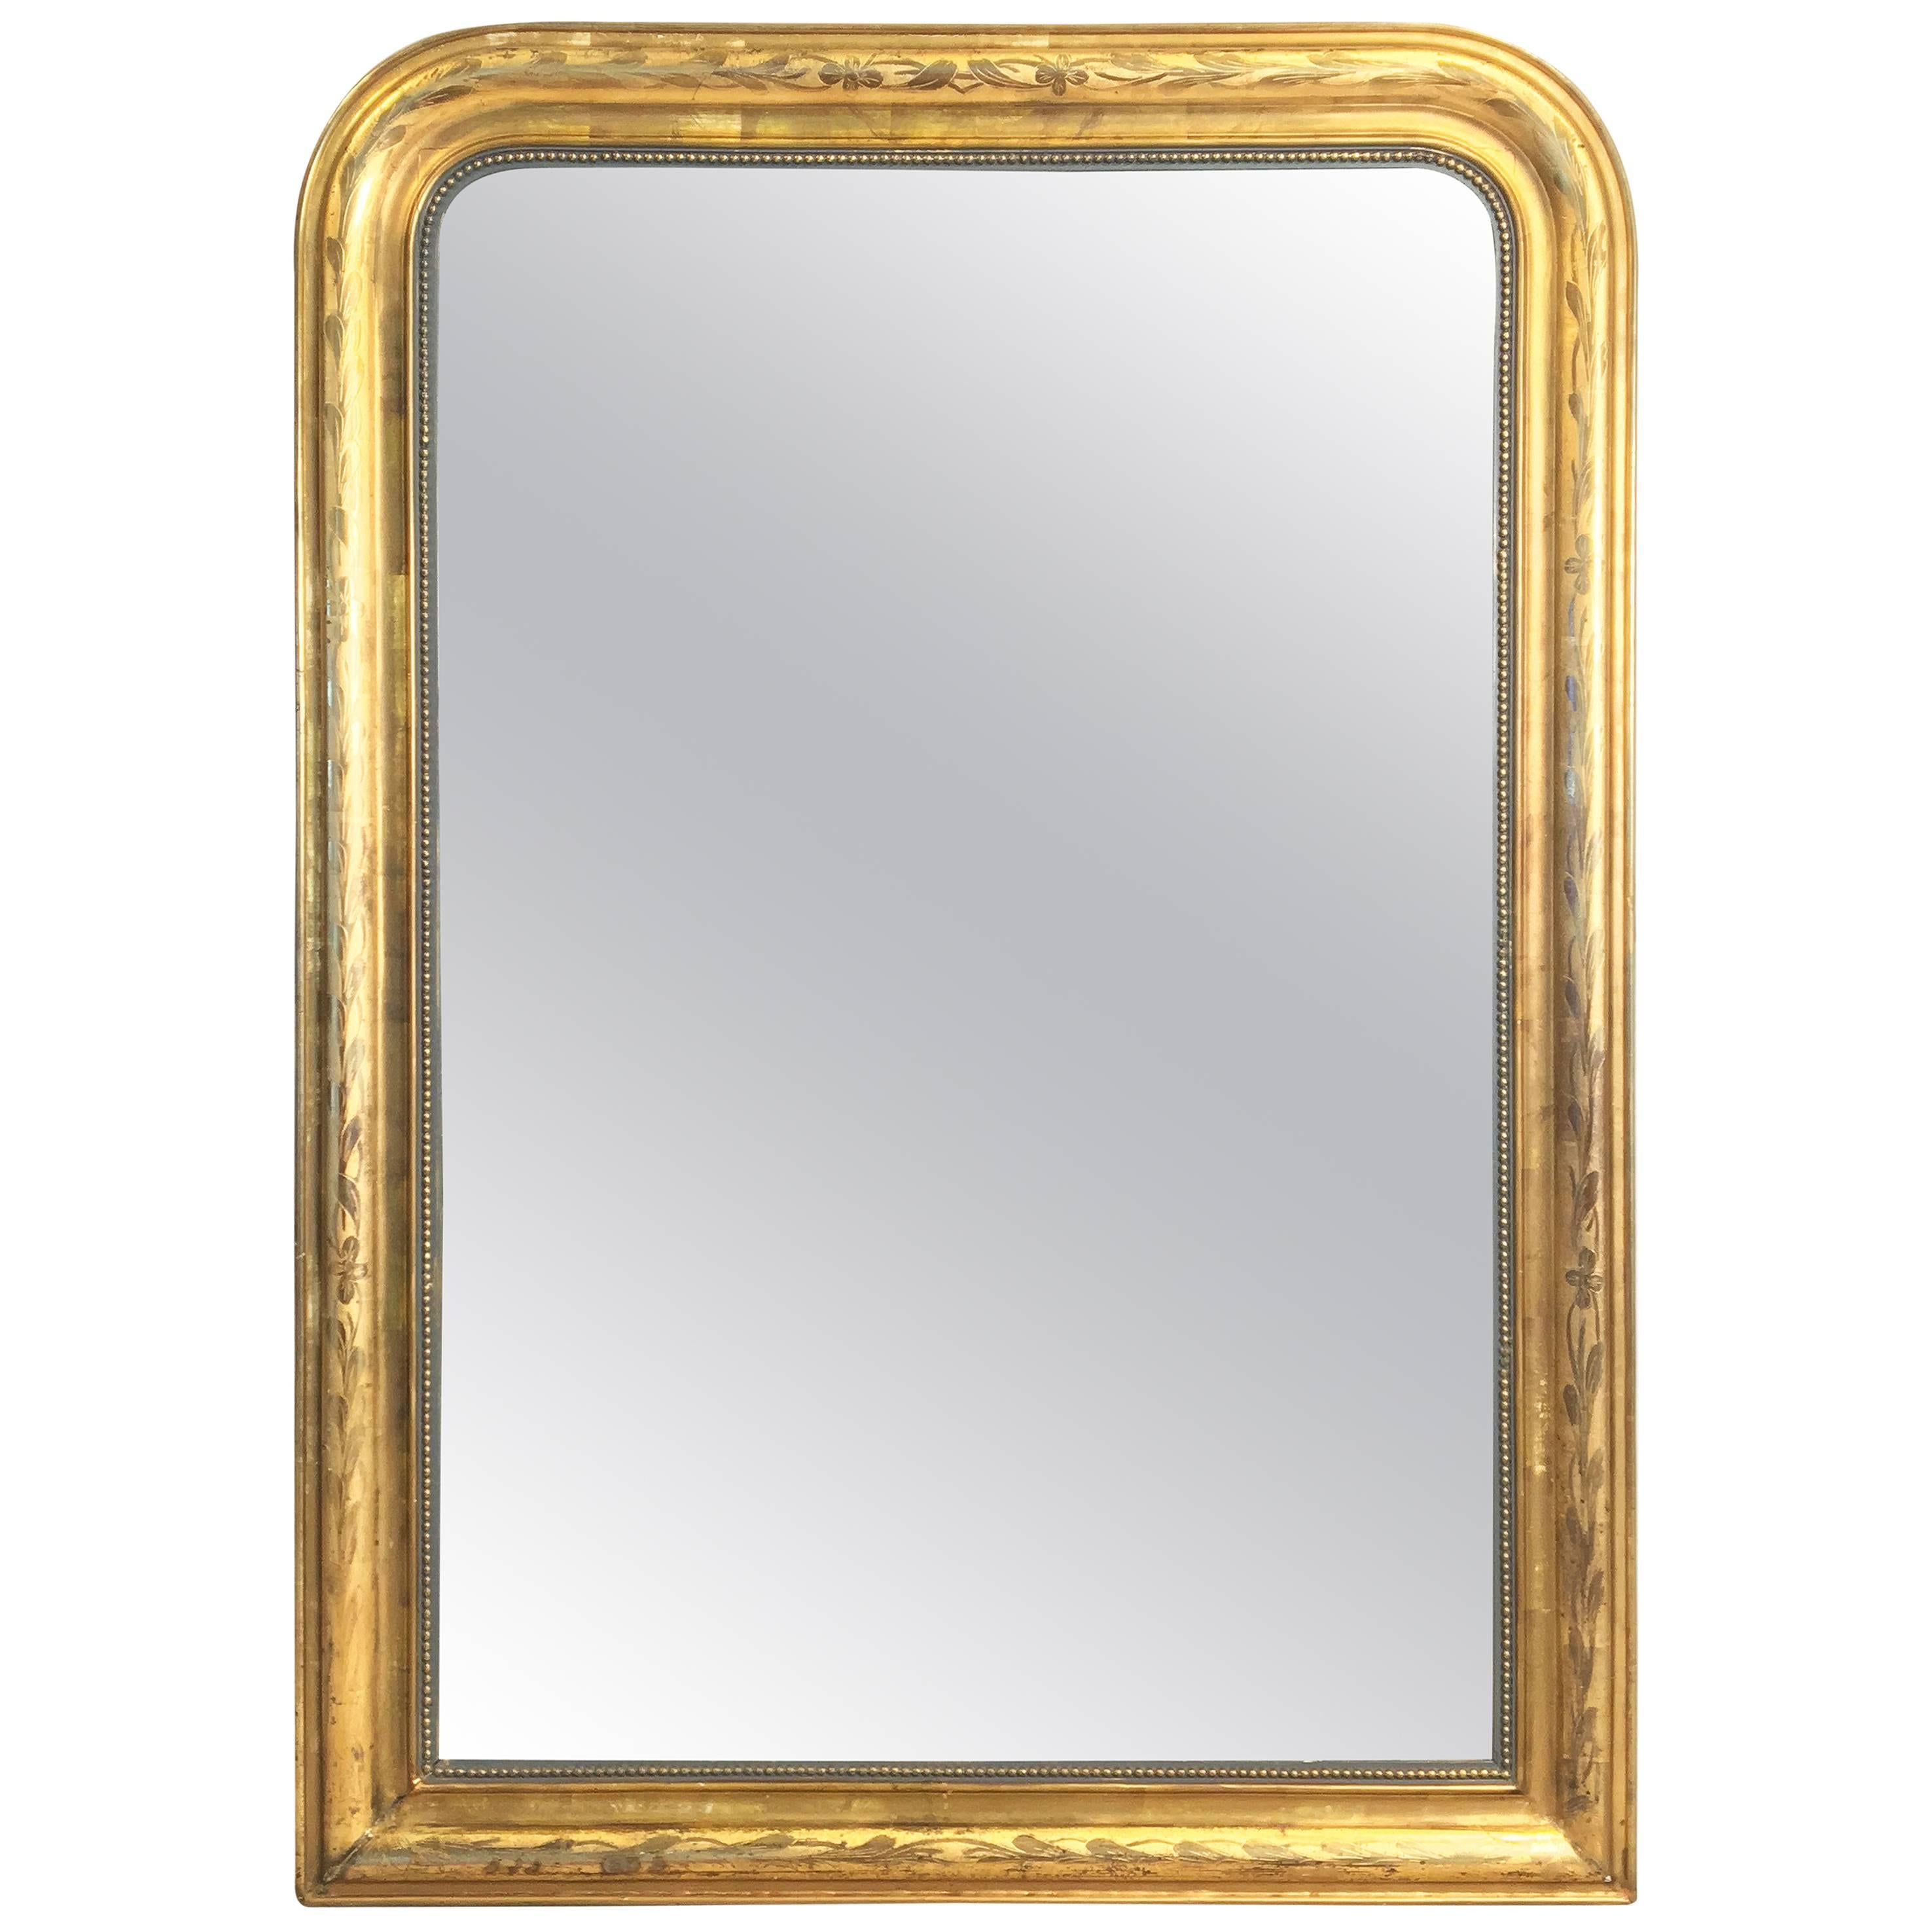 Large Louis Philippe Arch Top Gilt Mirror (H 55 1/4 x W 39 3/4)